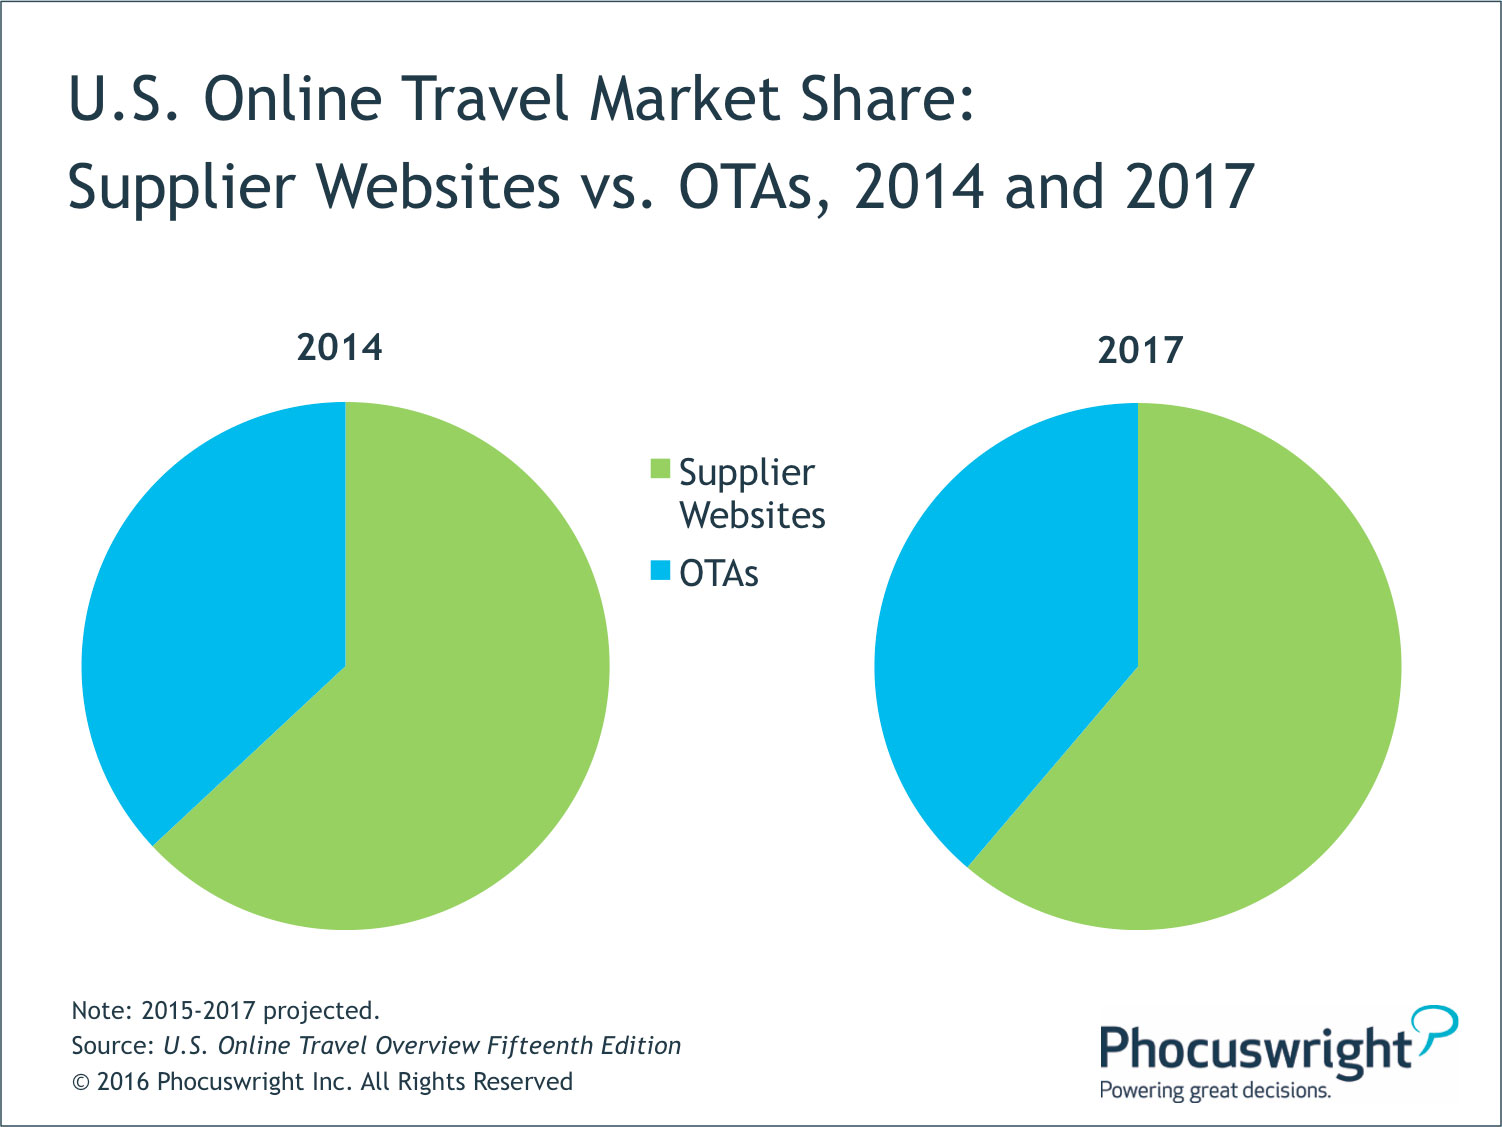 Package, Tour or FIT: Defining the Packaged Travel Market: Phocuswright